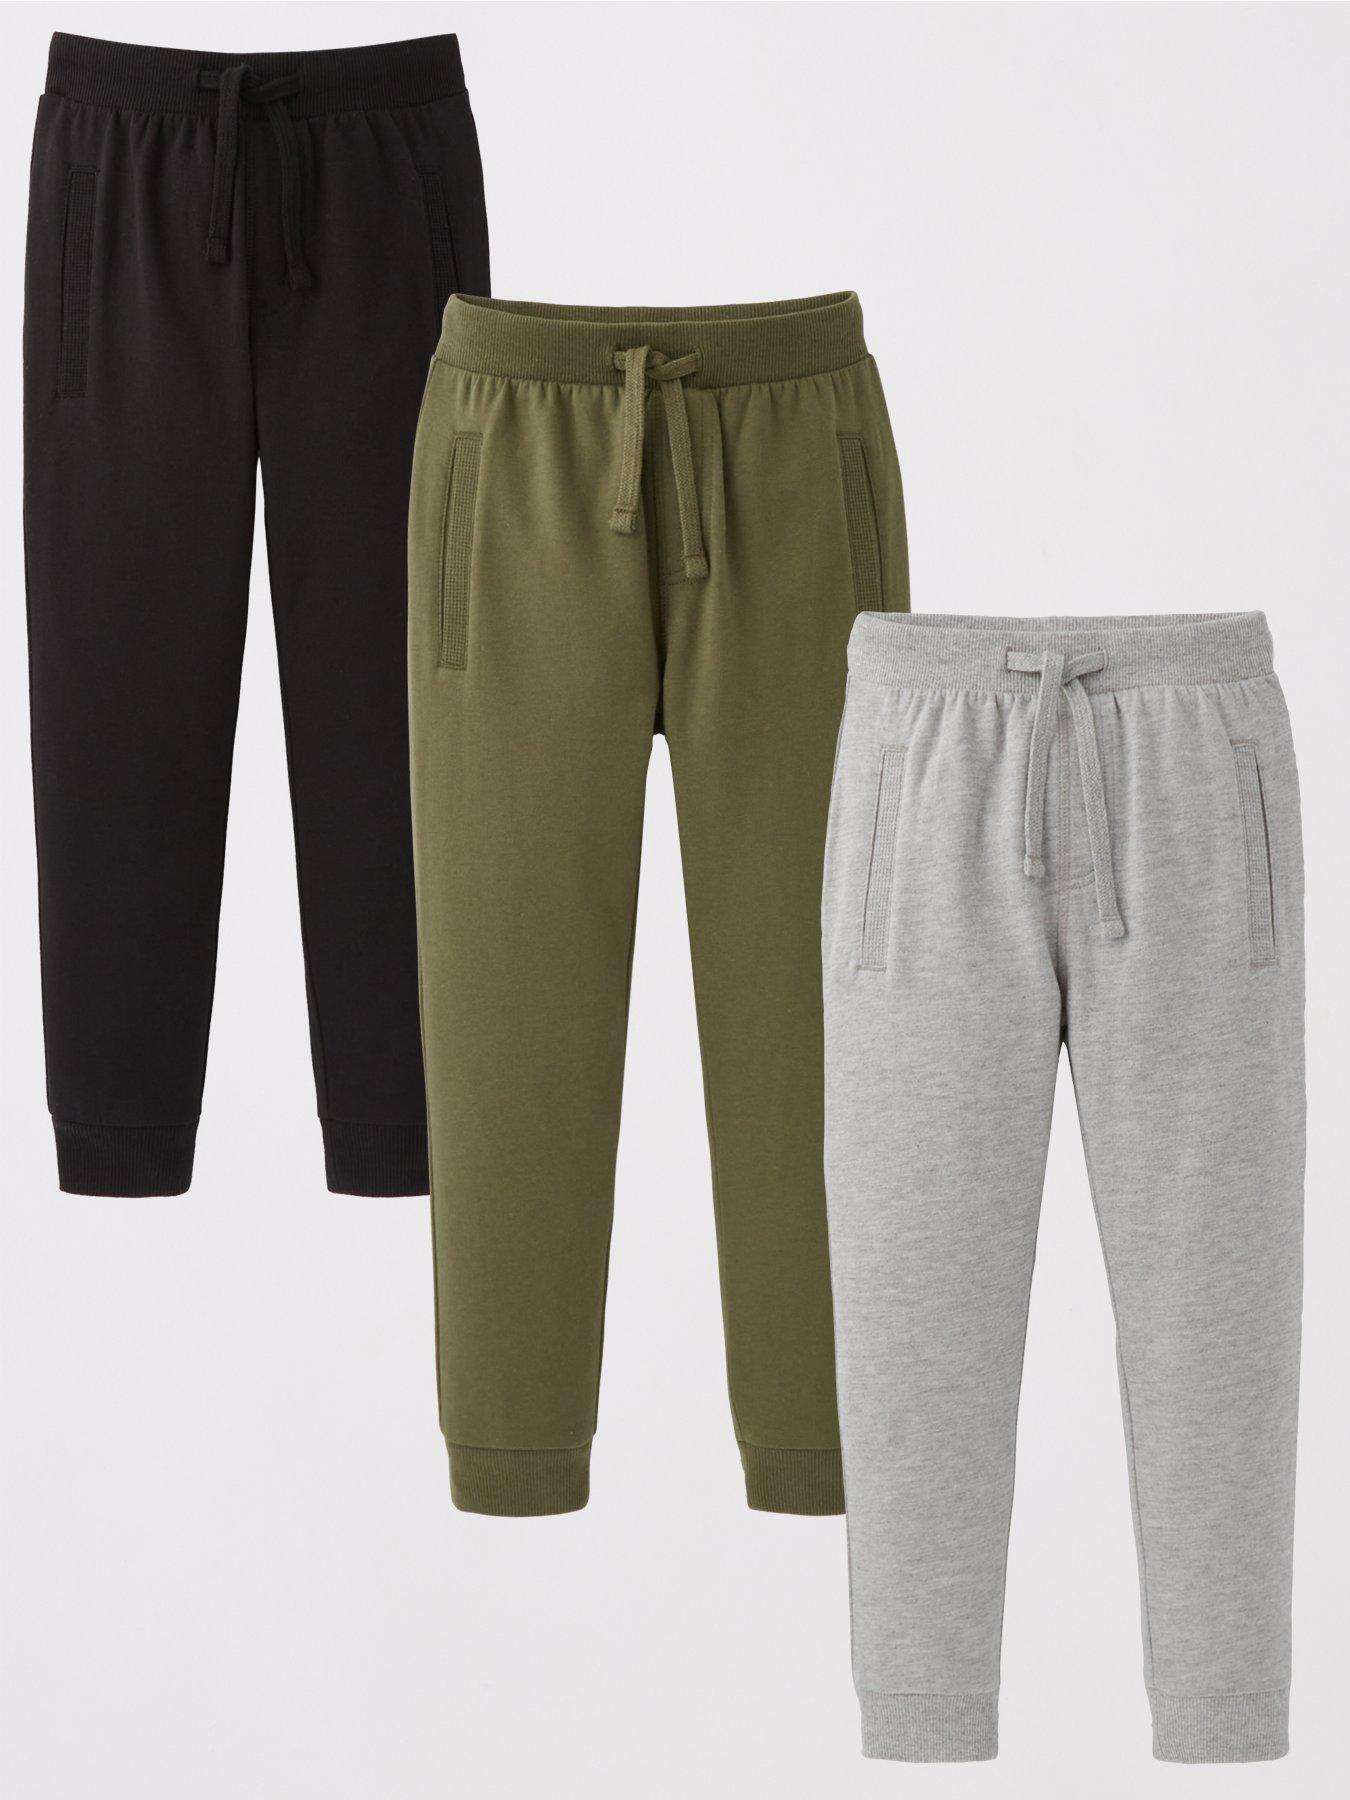 This Women's Joggers 3-Pack Is 42% Off at